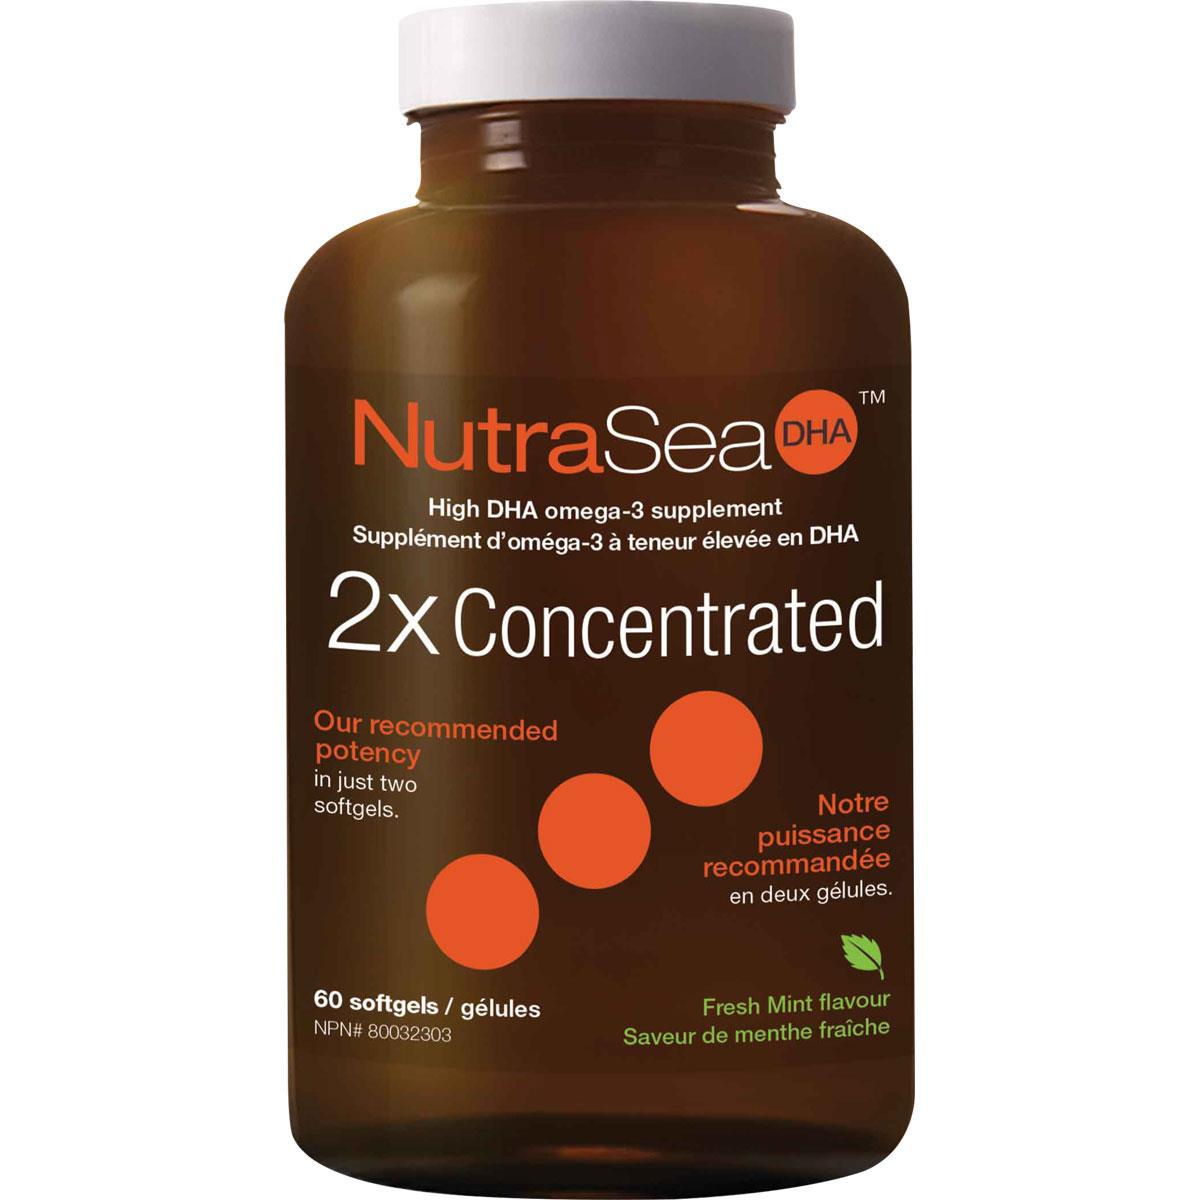 Ascenta Nutrasea DHA 2x Concentrated - 60 Soft Gels